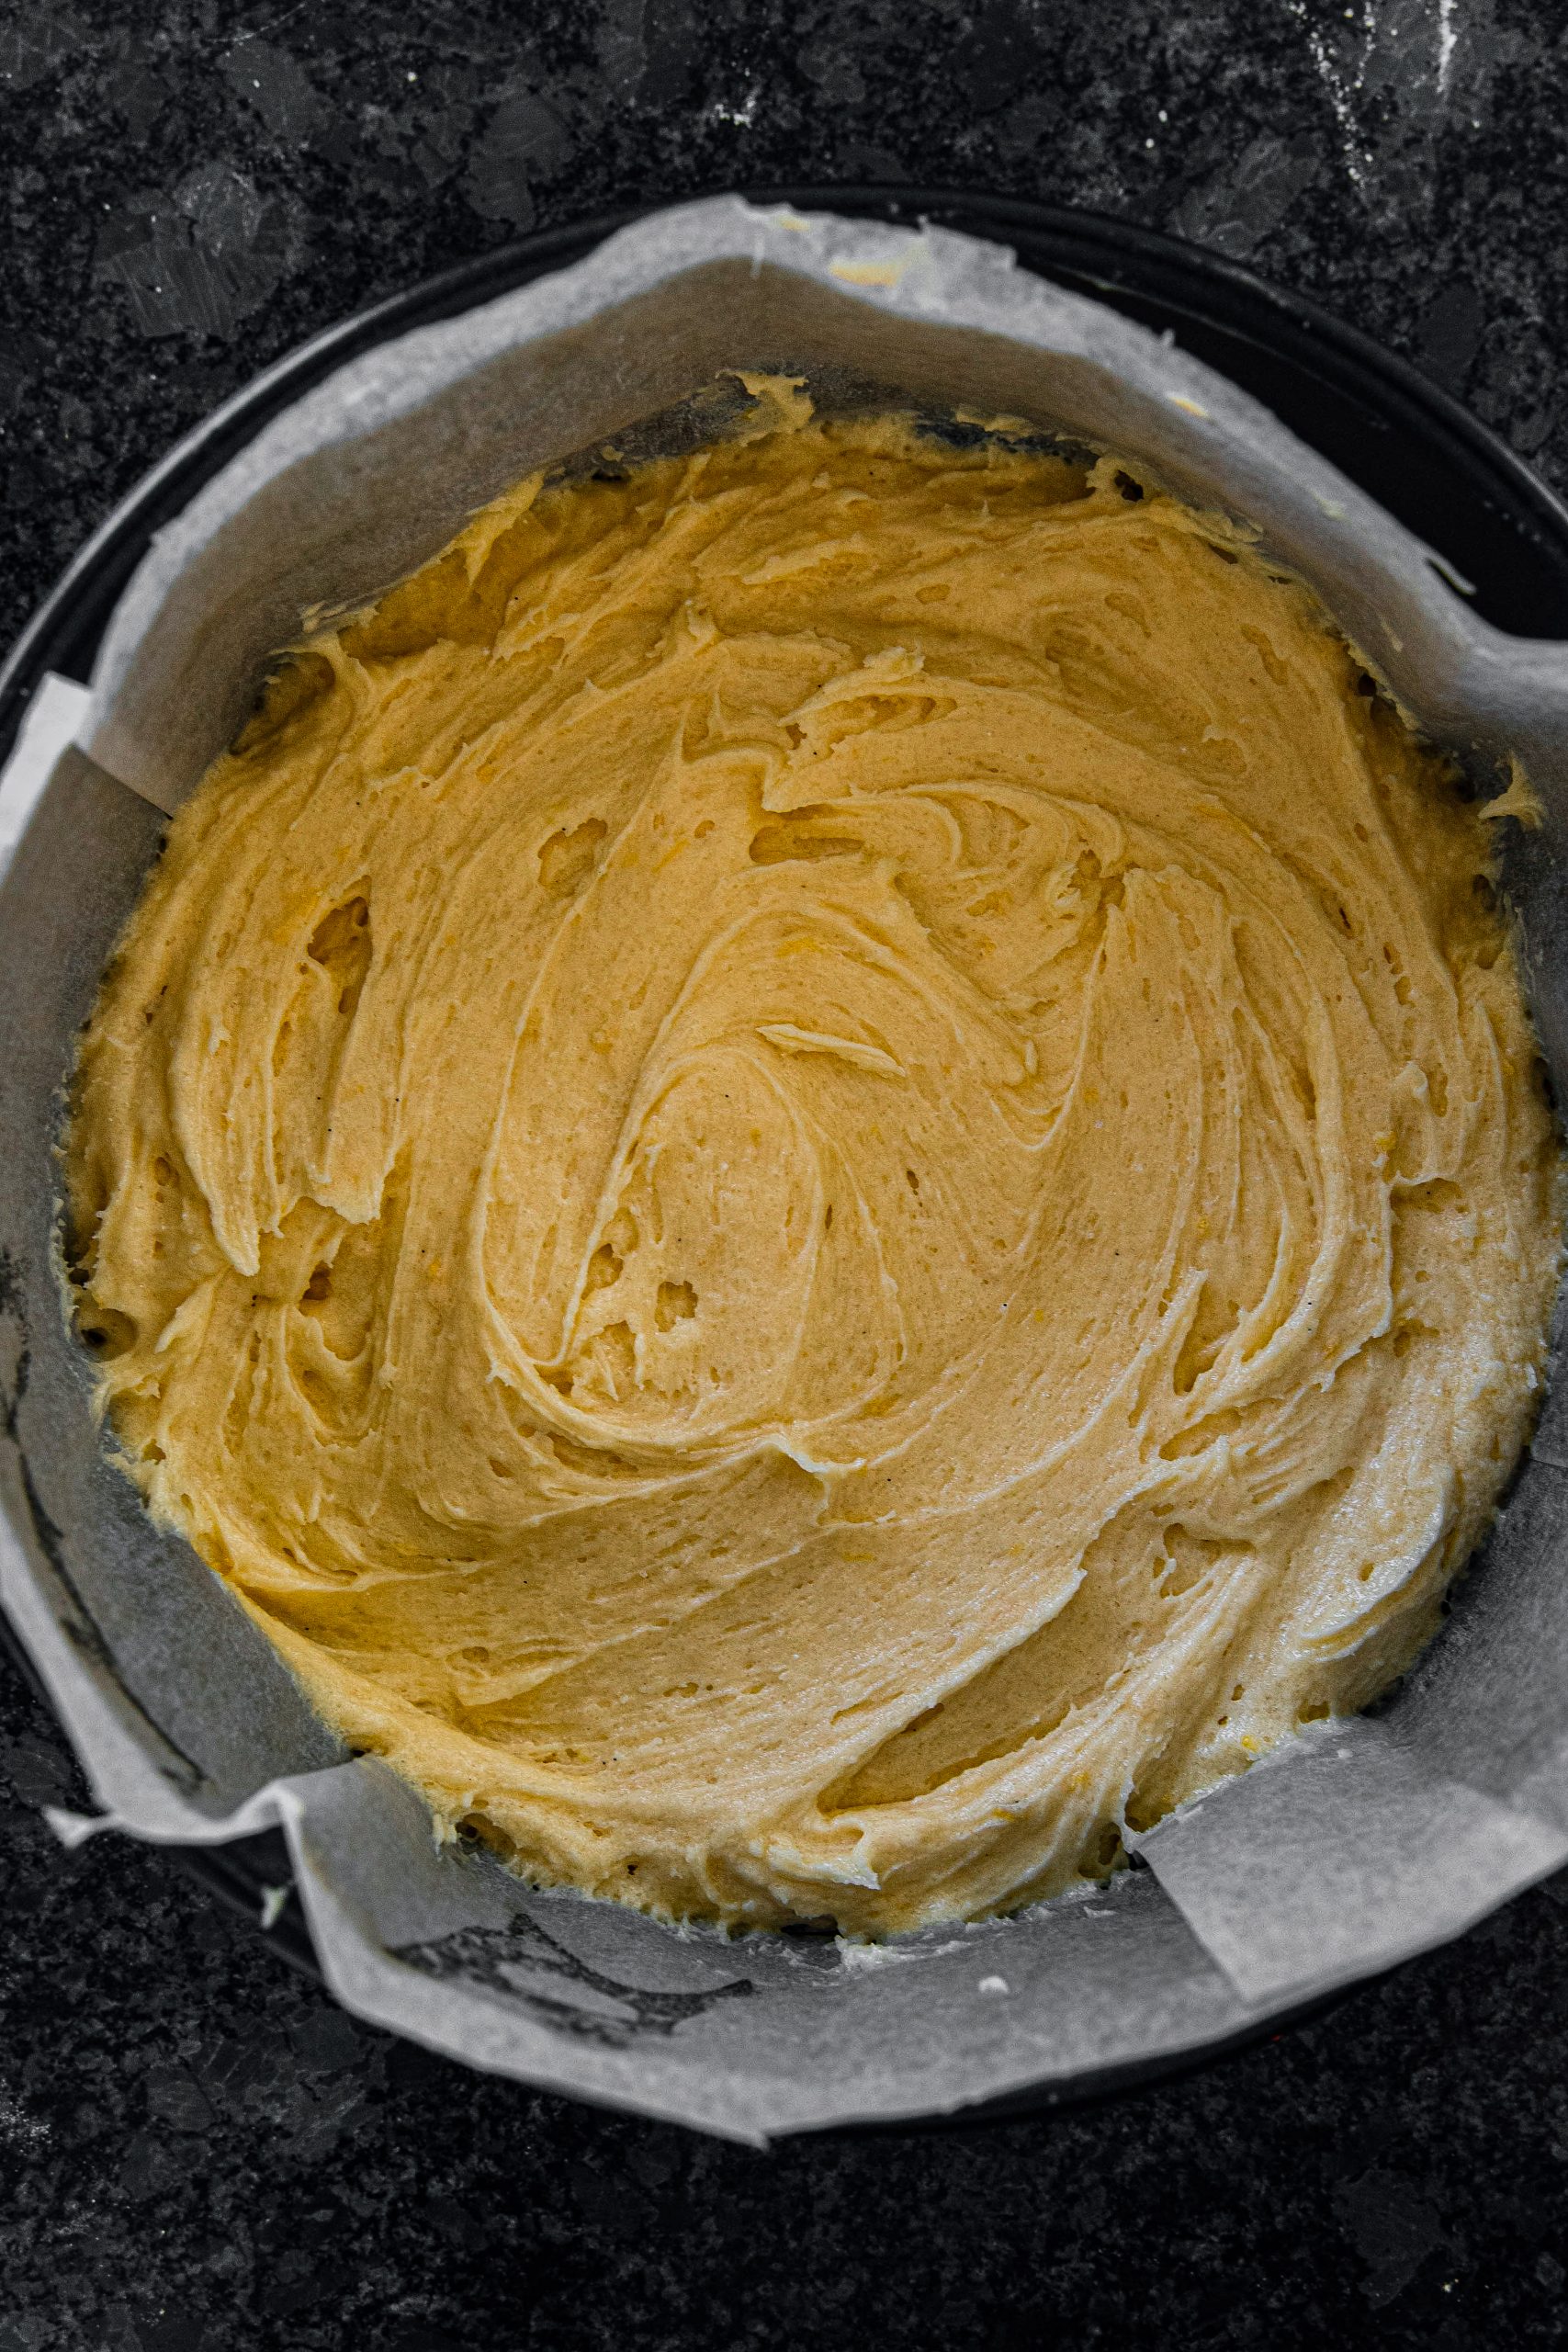 Time to bake! Pour the batter into your baking dish.